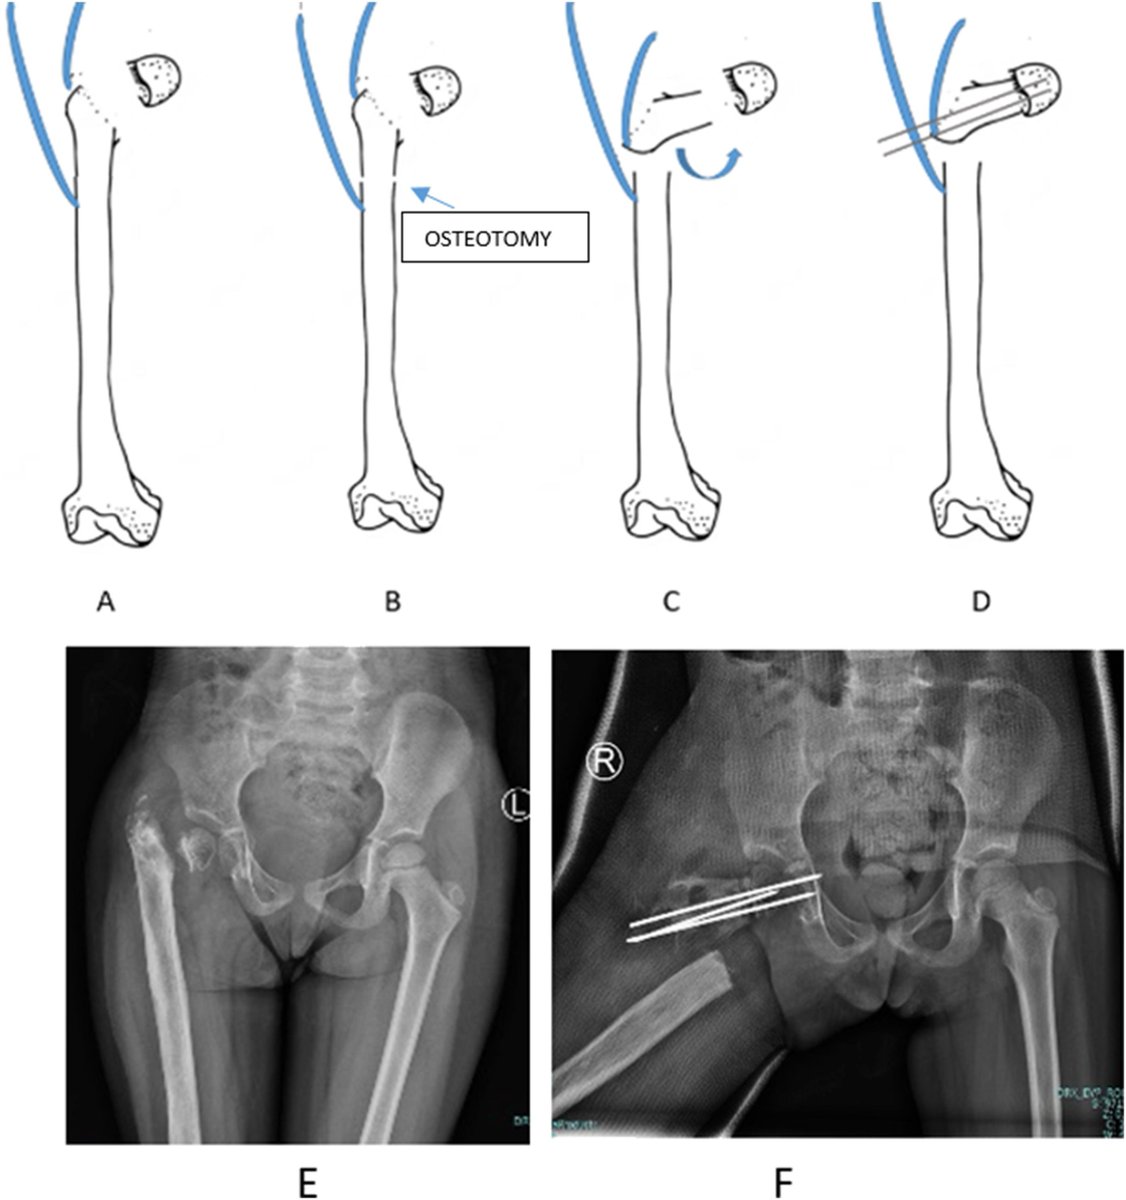 Modified “SUPERhip2” to Reconstruct Postinfectious Femoral Neck Pseudoarthrosis (Hunka Type 3) #hip bit.ly/3KcEWTp